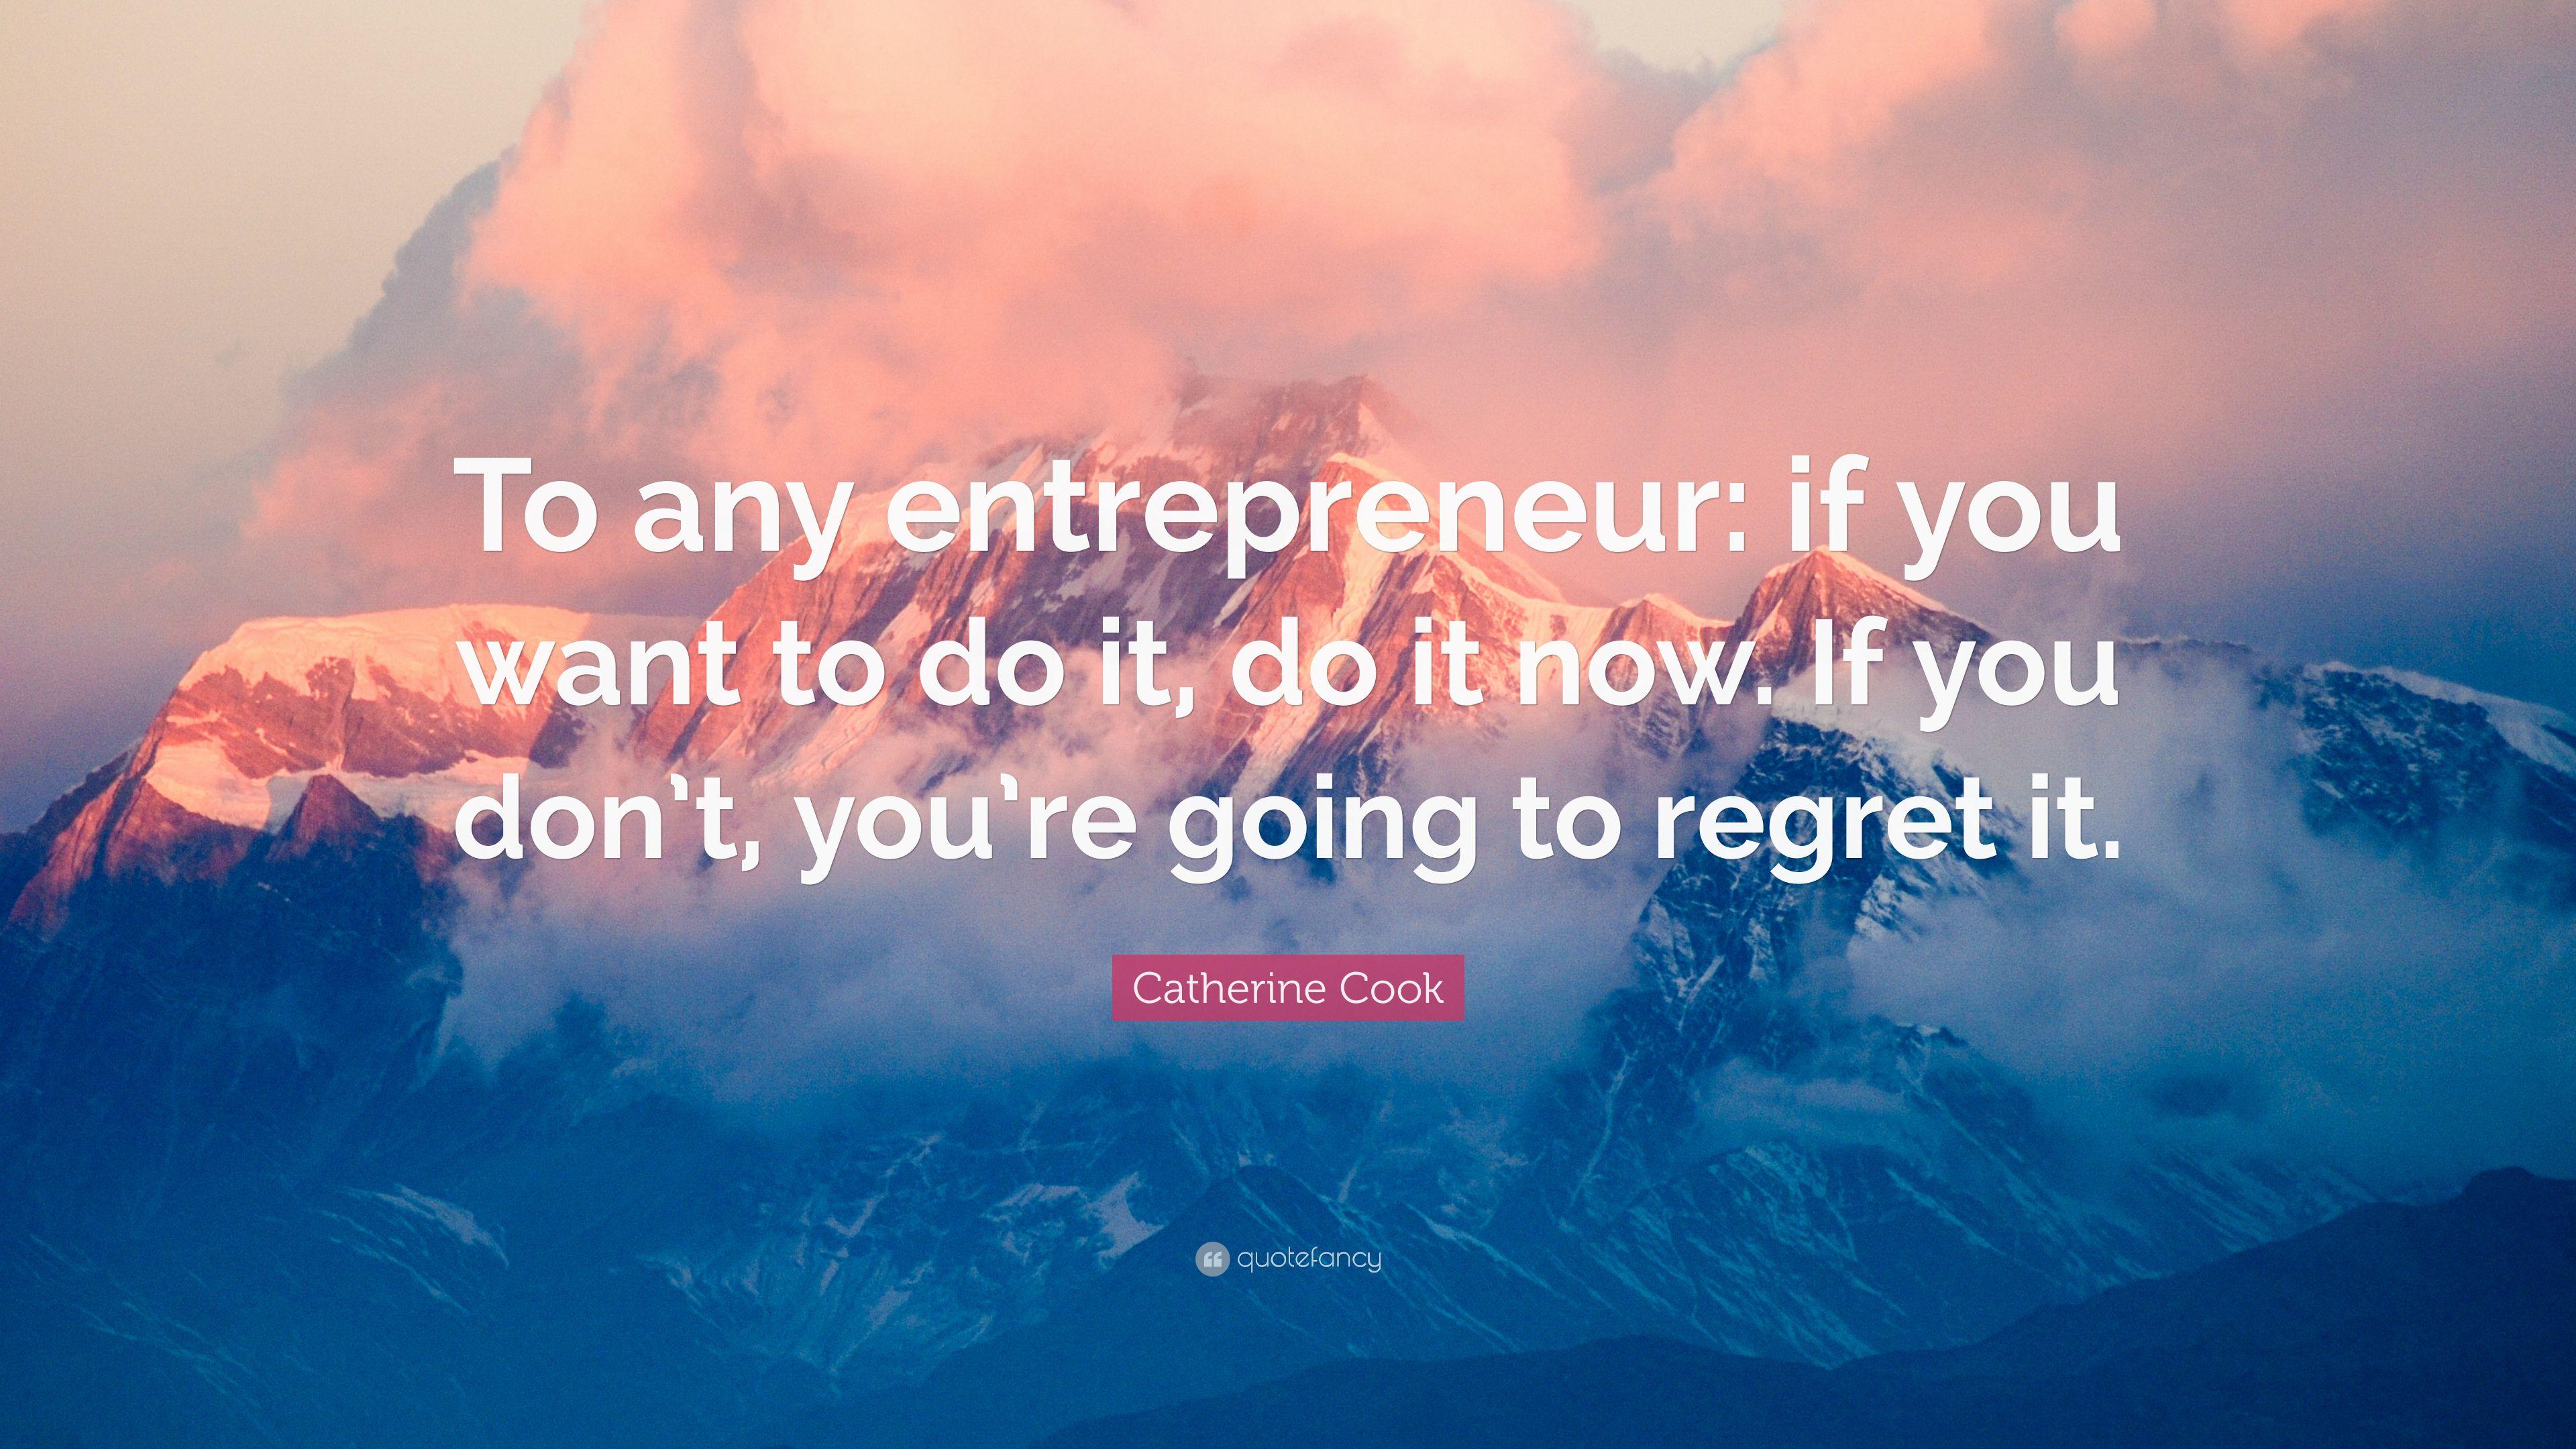 Catherine Cook Quote: “To any entrepreneur: if you want to do it, do